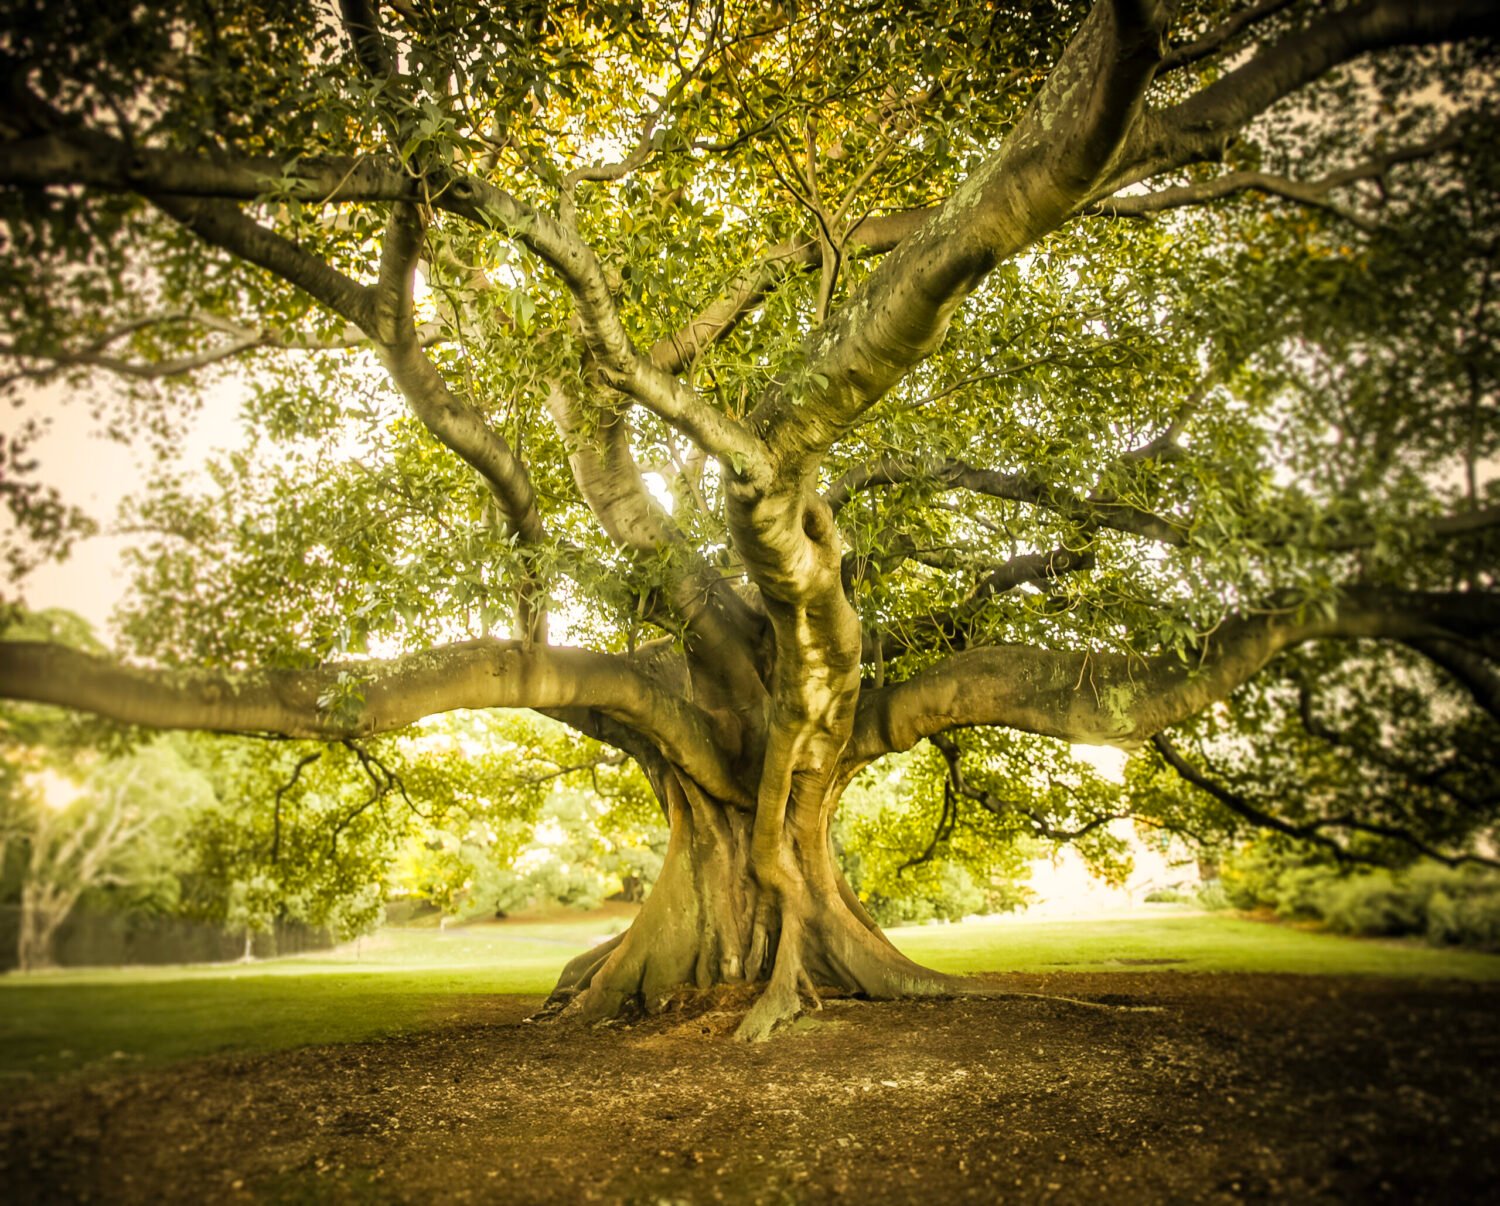 Majestic fig tree with expansive canopy in a tranquil park setting.